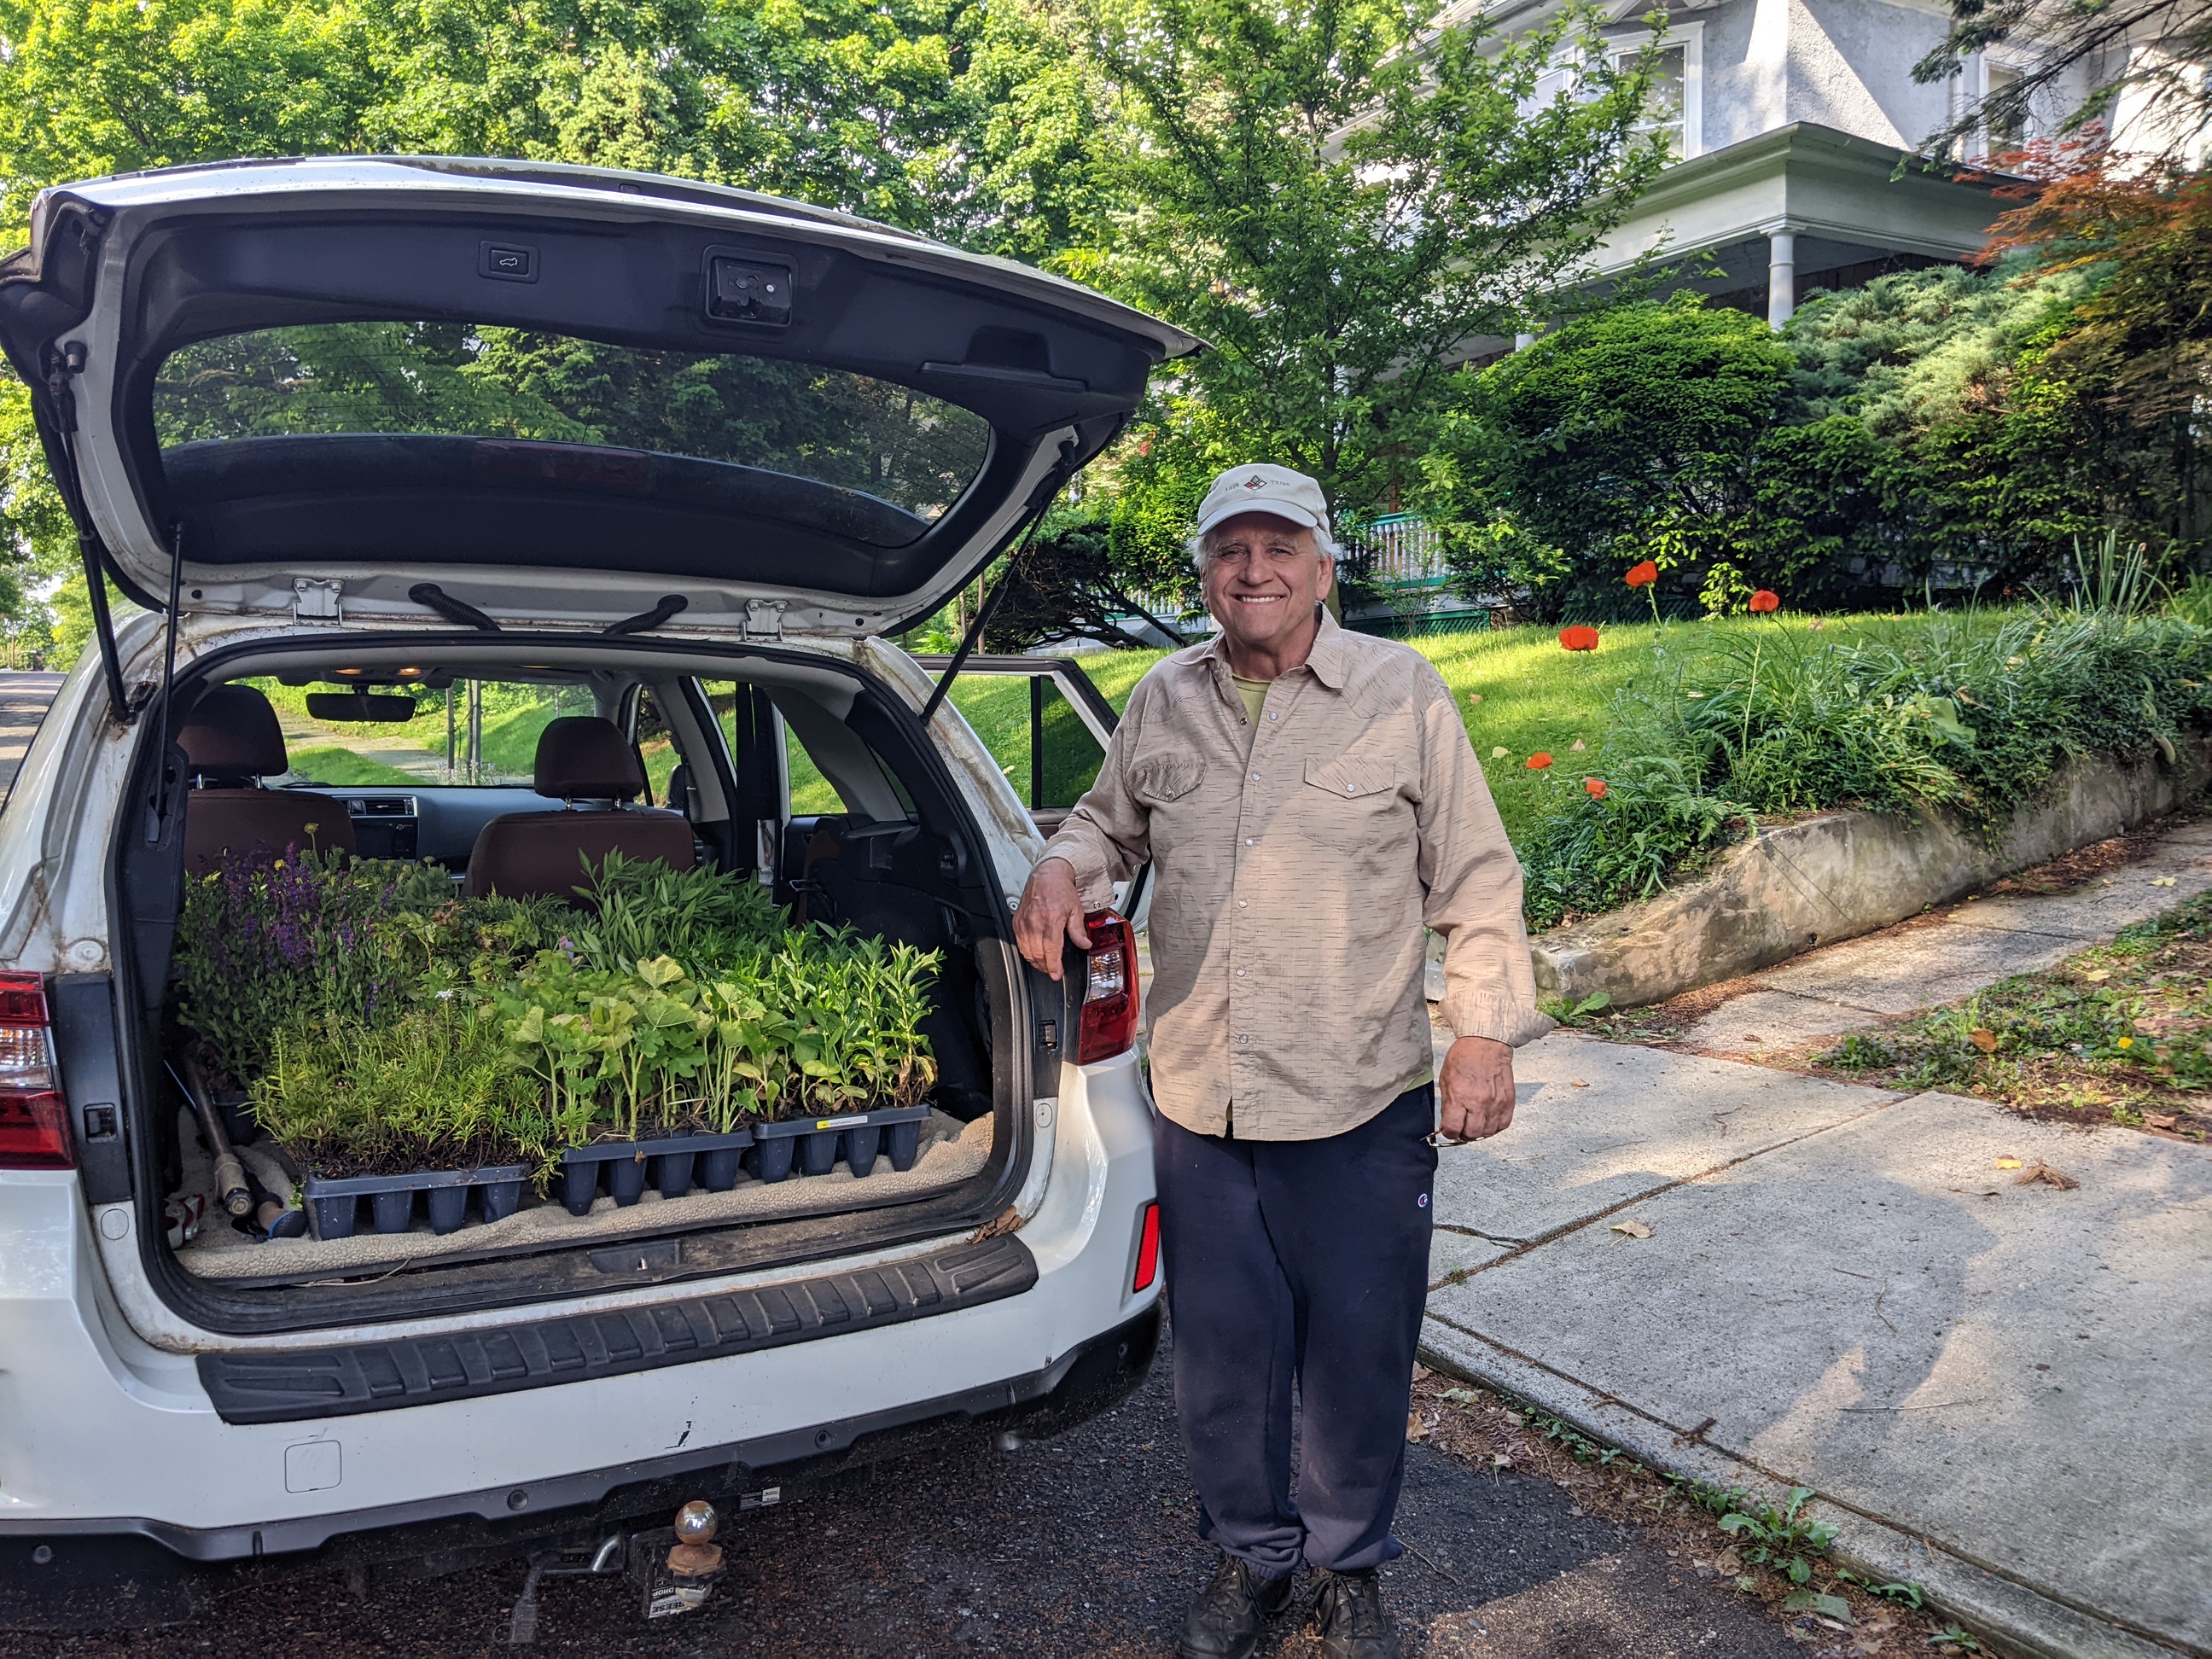 Pennsylvania Horticultural Society received and distributed over 900 plants from American Meadows to help support their programs throughout Philadelphia. Here a happy recipient is ready to dig in!